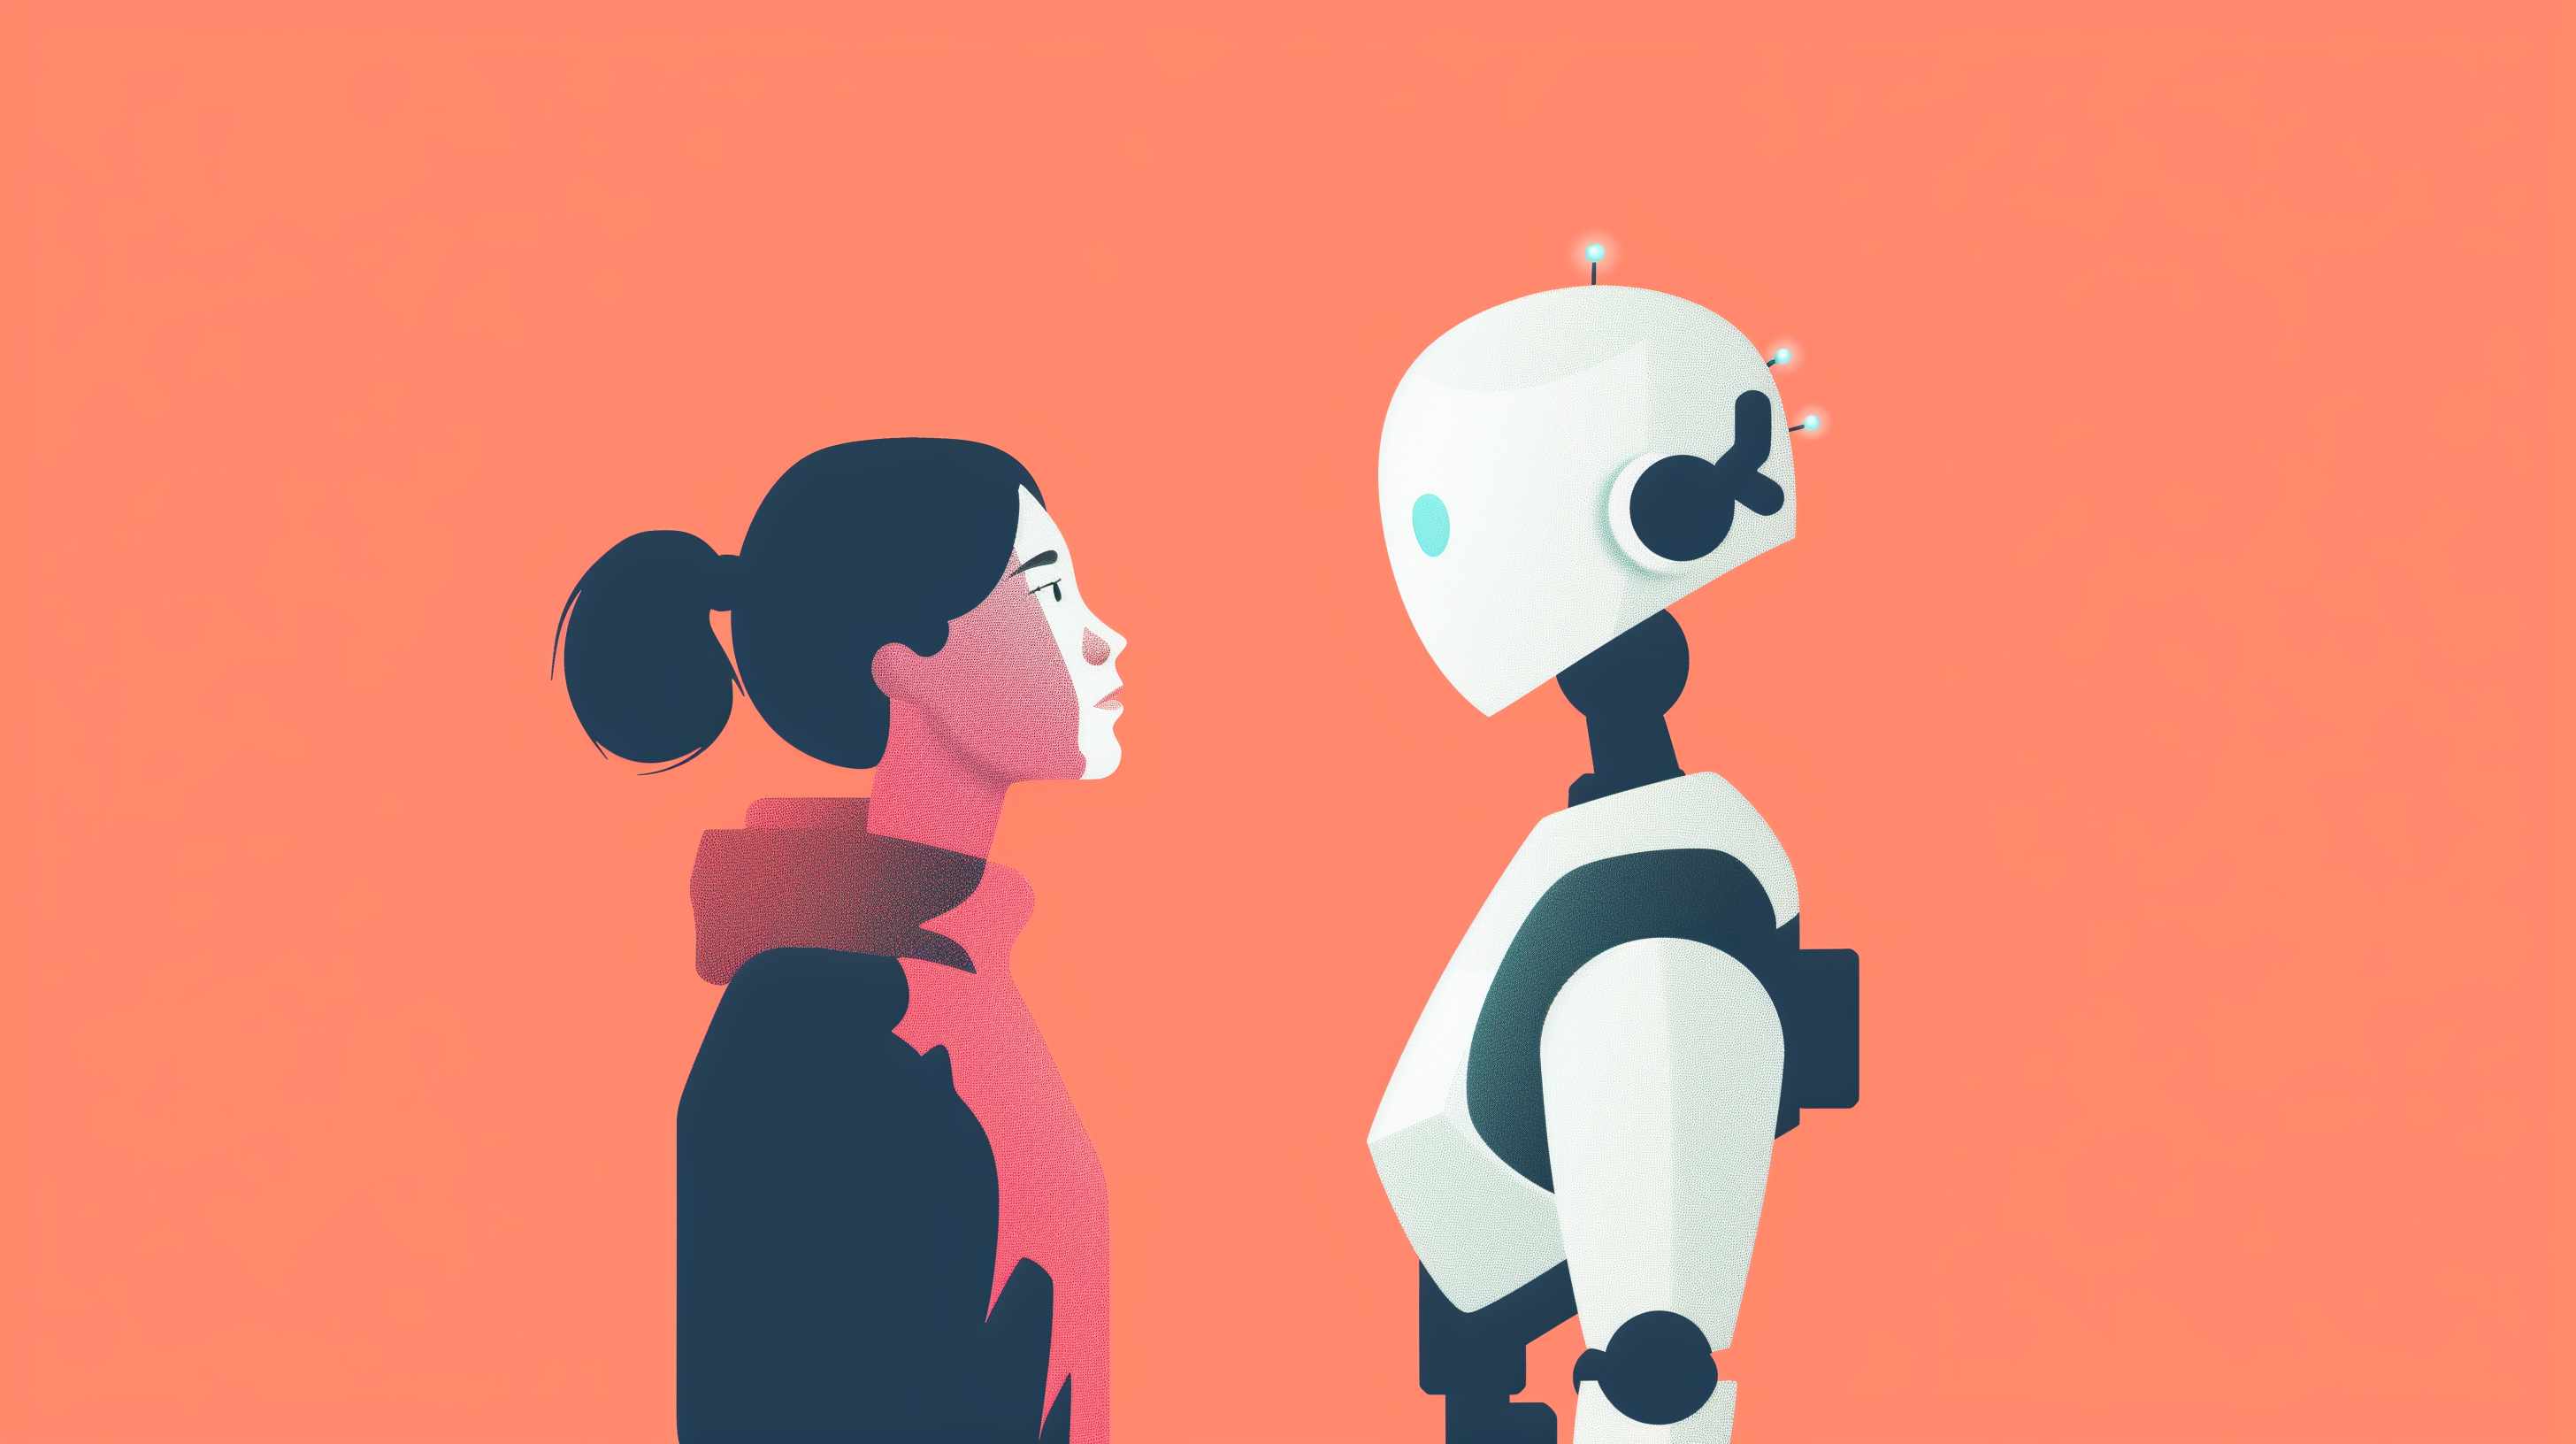 an illustration of a person and a robot looking at each other